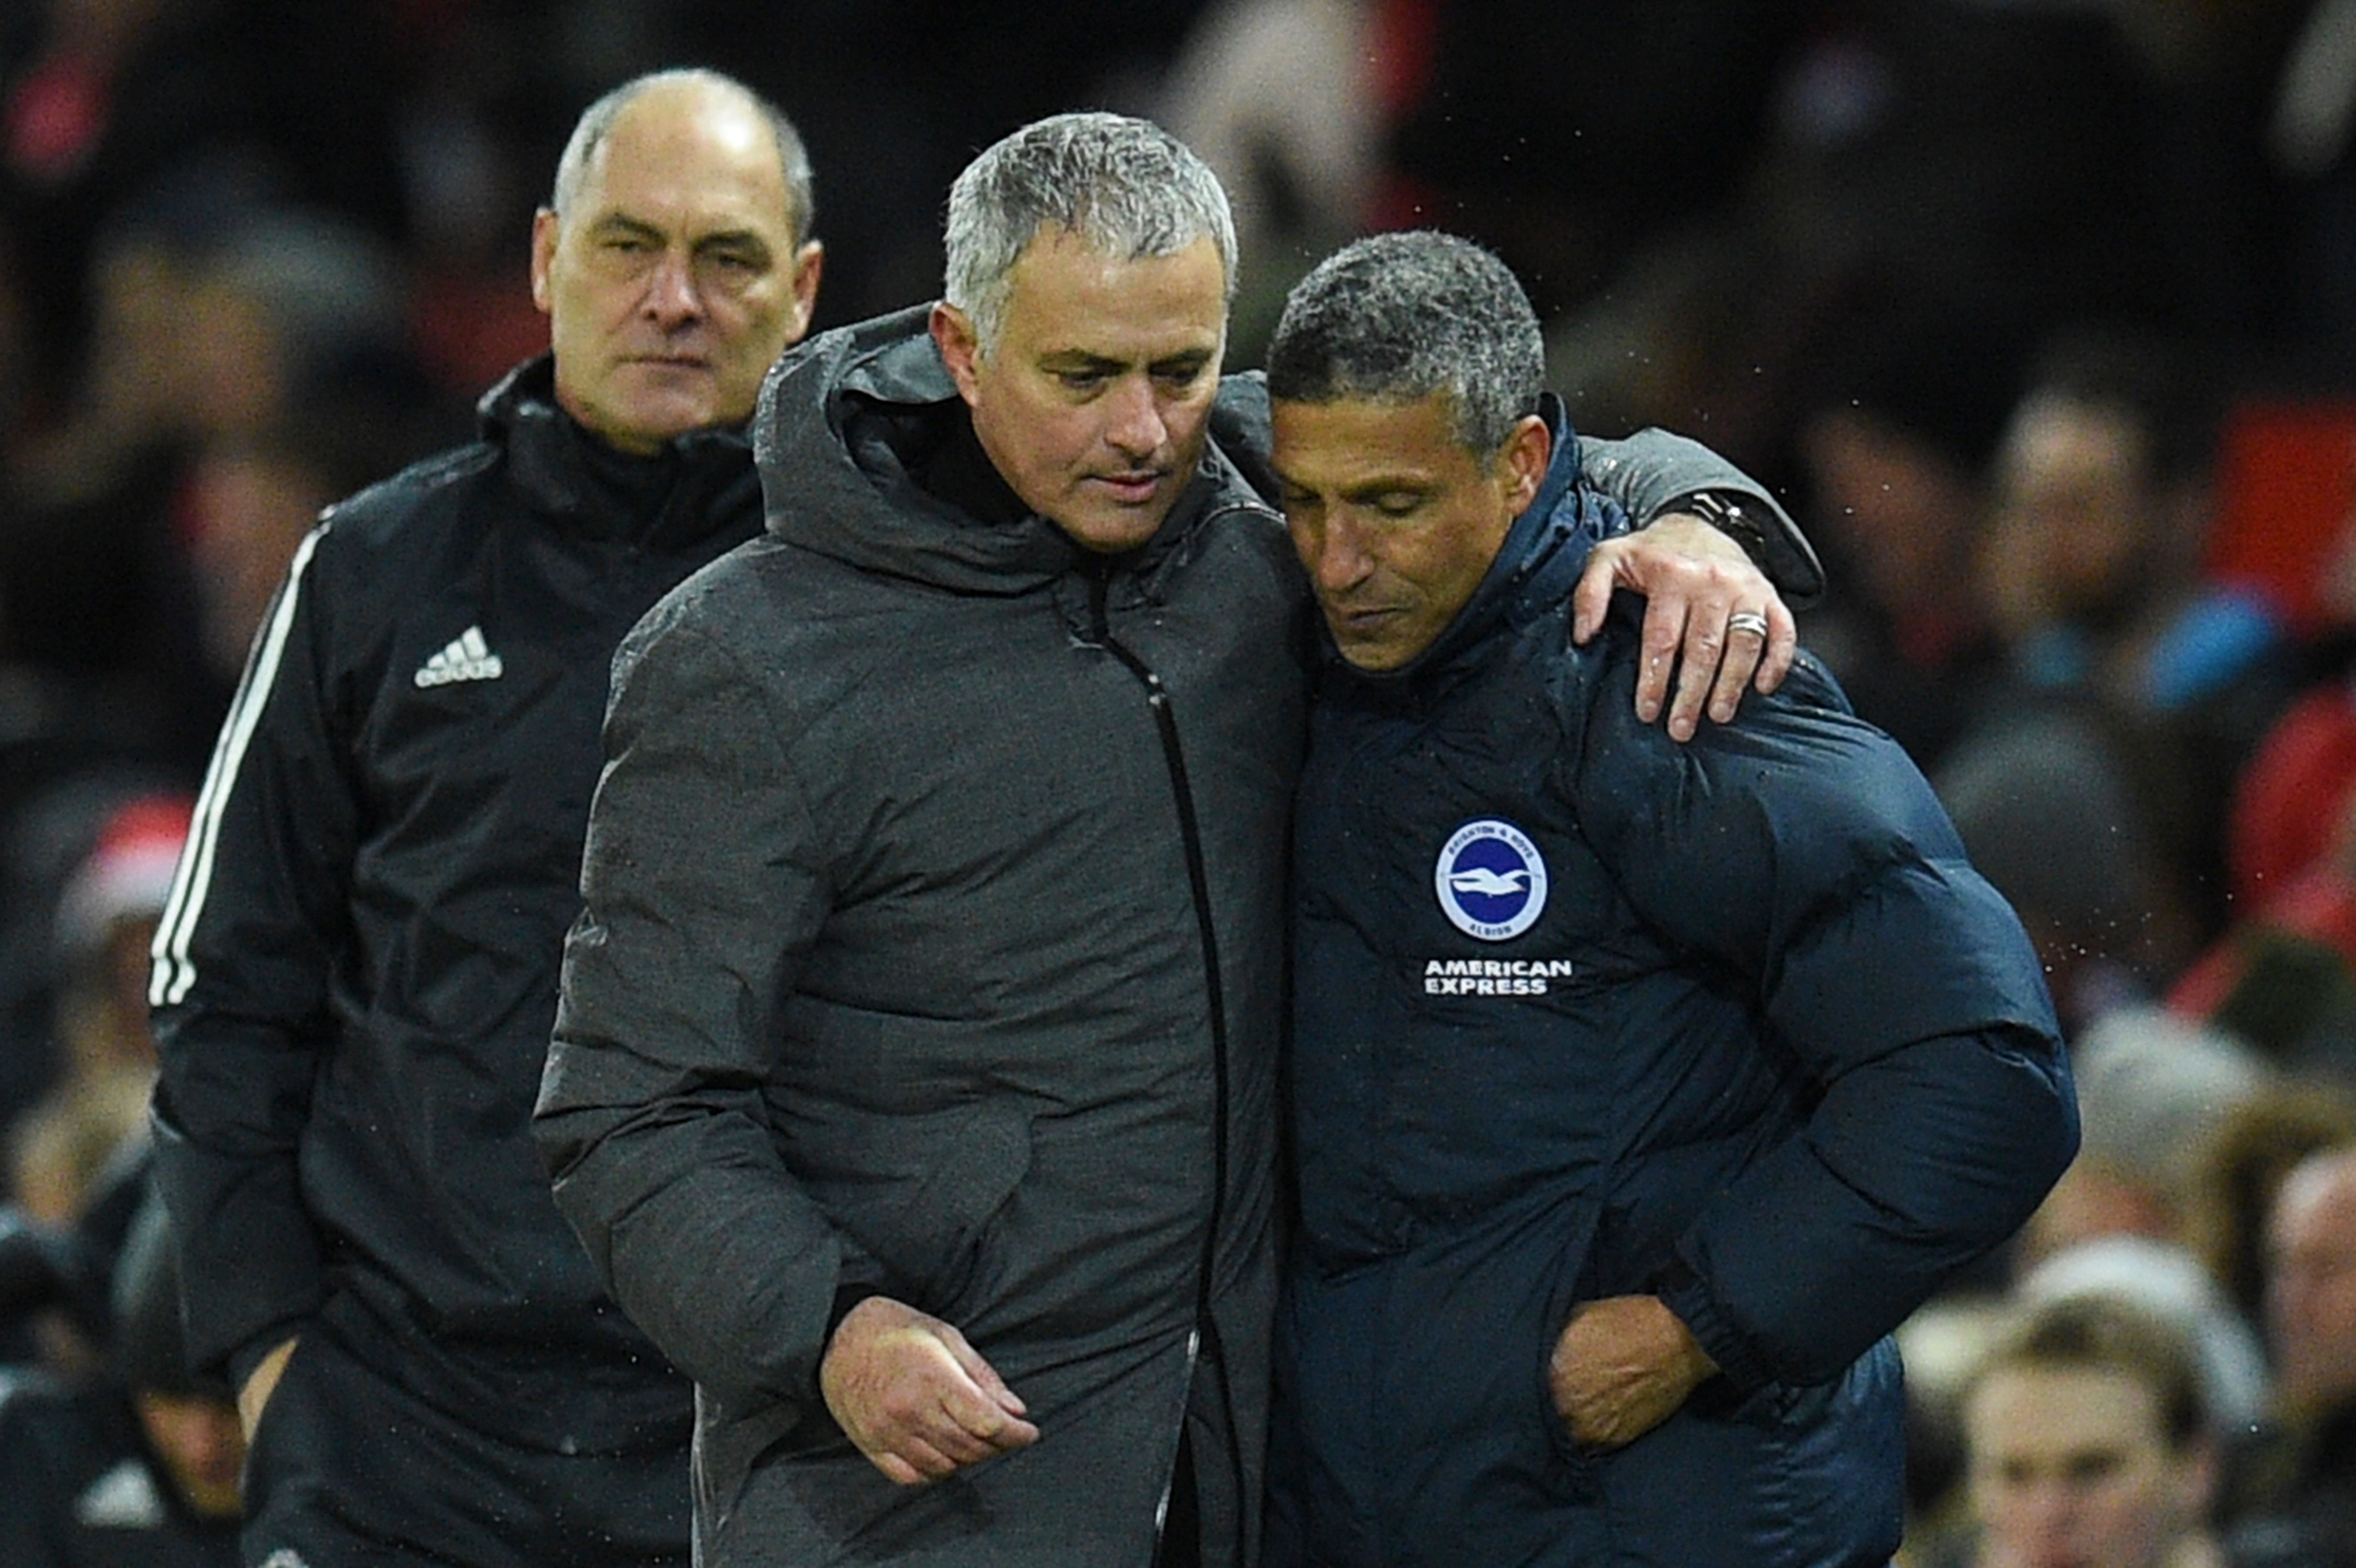 Manchester United's Portuguese manager Jose Mourinho (2R) leaves the pitch with Brighton's Irish manager Chris Hughton (R) during the English Premier League football match between Manchester United and Brighton and Hove Albion at Old Trafford in Manchester, north west England, on November 25, 2017. / AFP PHOTO / Oli SCARFF / RESTRICTED TO EDITORIAL USE. No use with unauthorized audio, video, data, fixture lists, club/league logos or 'live' services. Online in-match use limited to 75 images, no video emulation. No use in betting, games or single club/league/player publications.  /         (Photo credit should read OLI SCARFF/AFP/Getty Images)